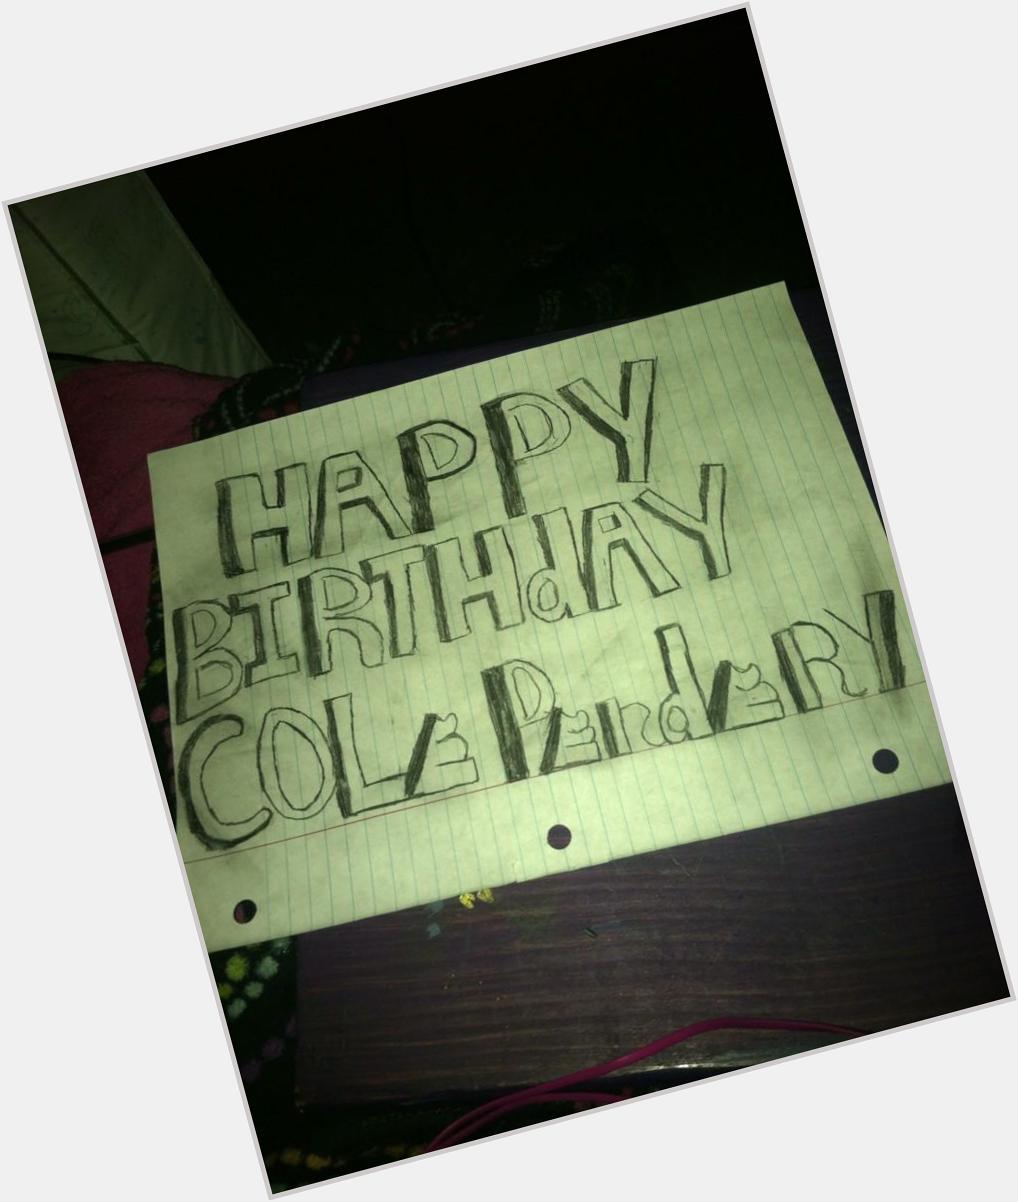 HAPPY BIRTHDAY to Cole Pendery. I hope you have a great and wonder 19 birthday.   